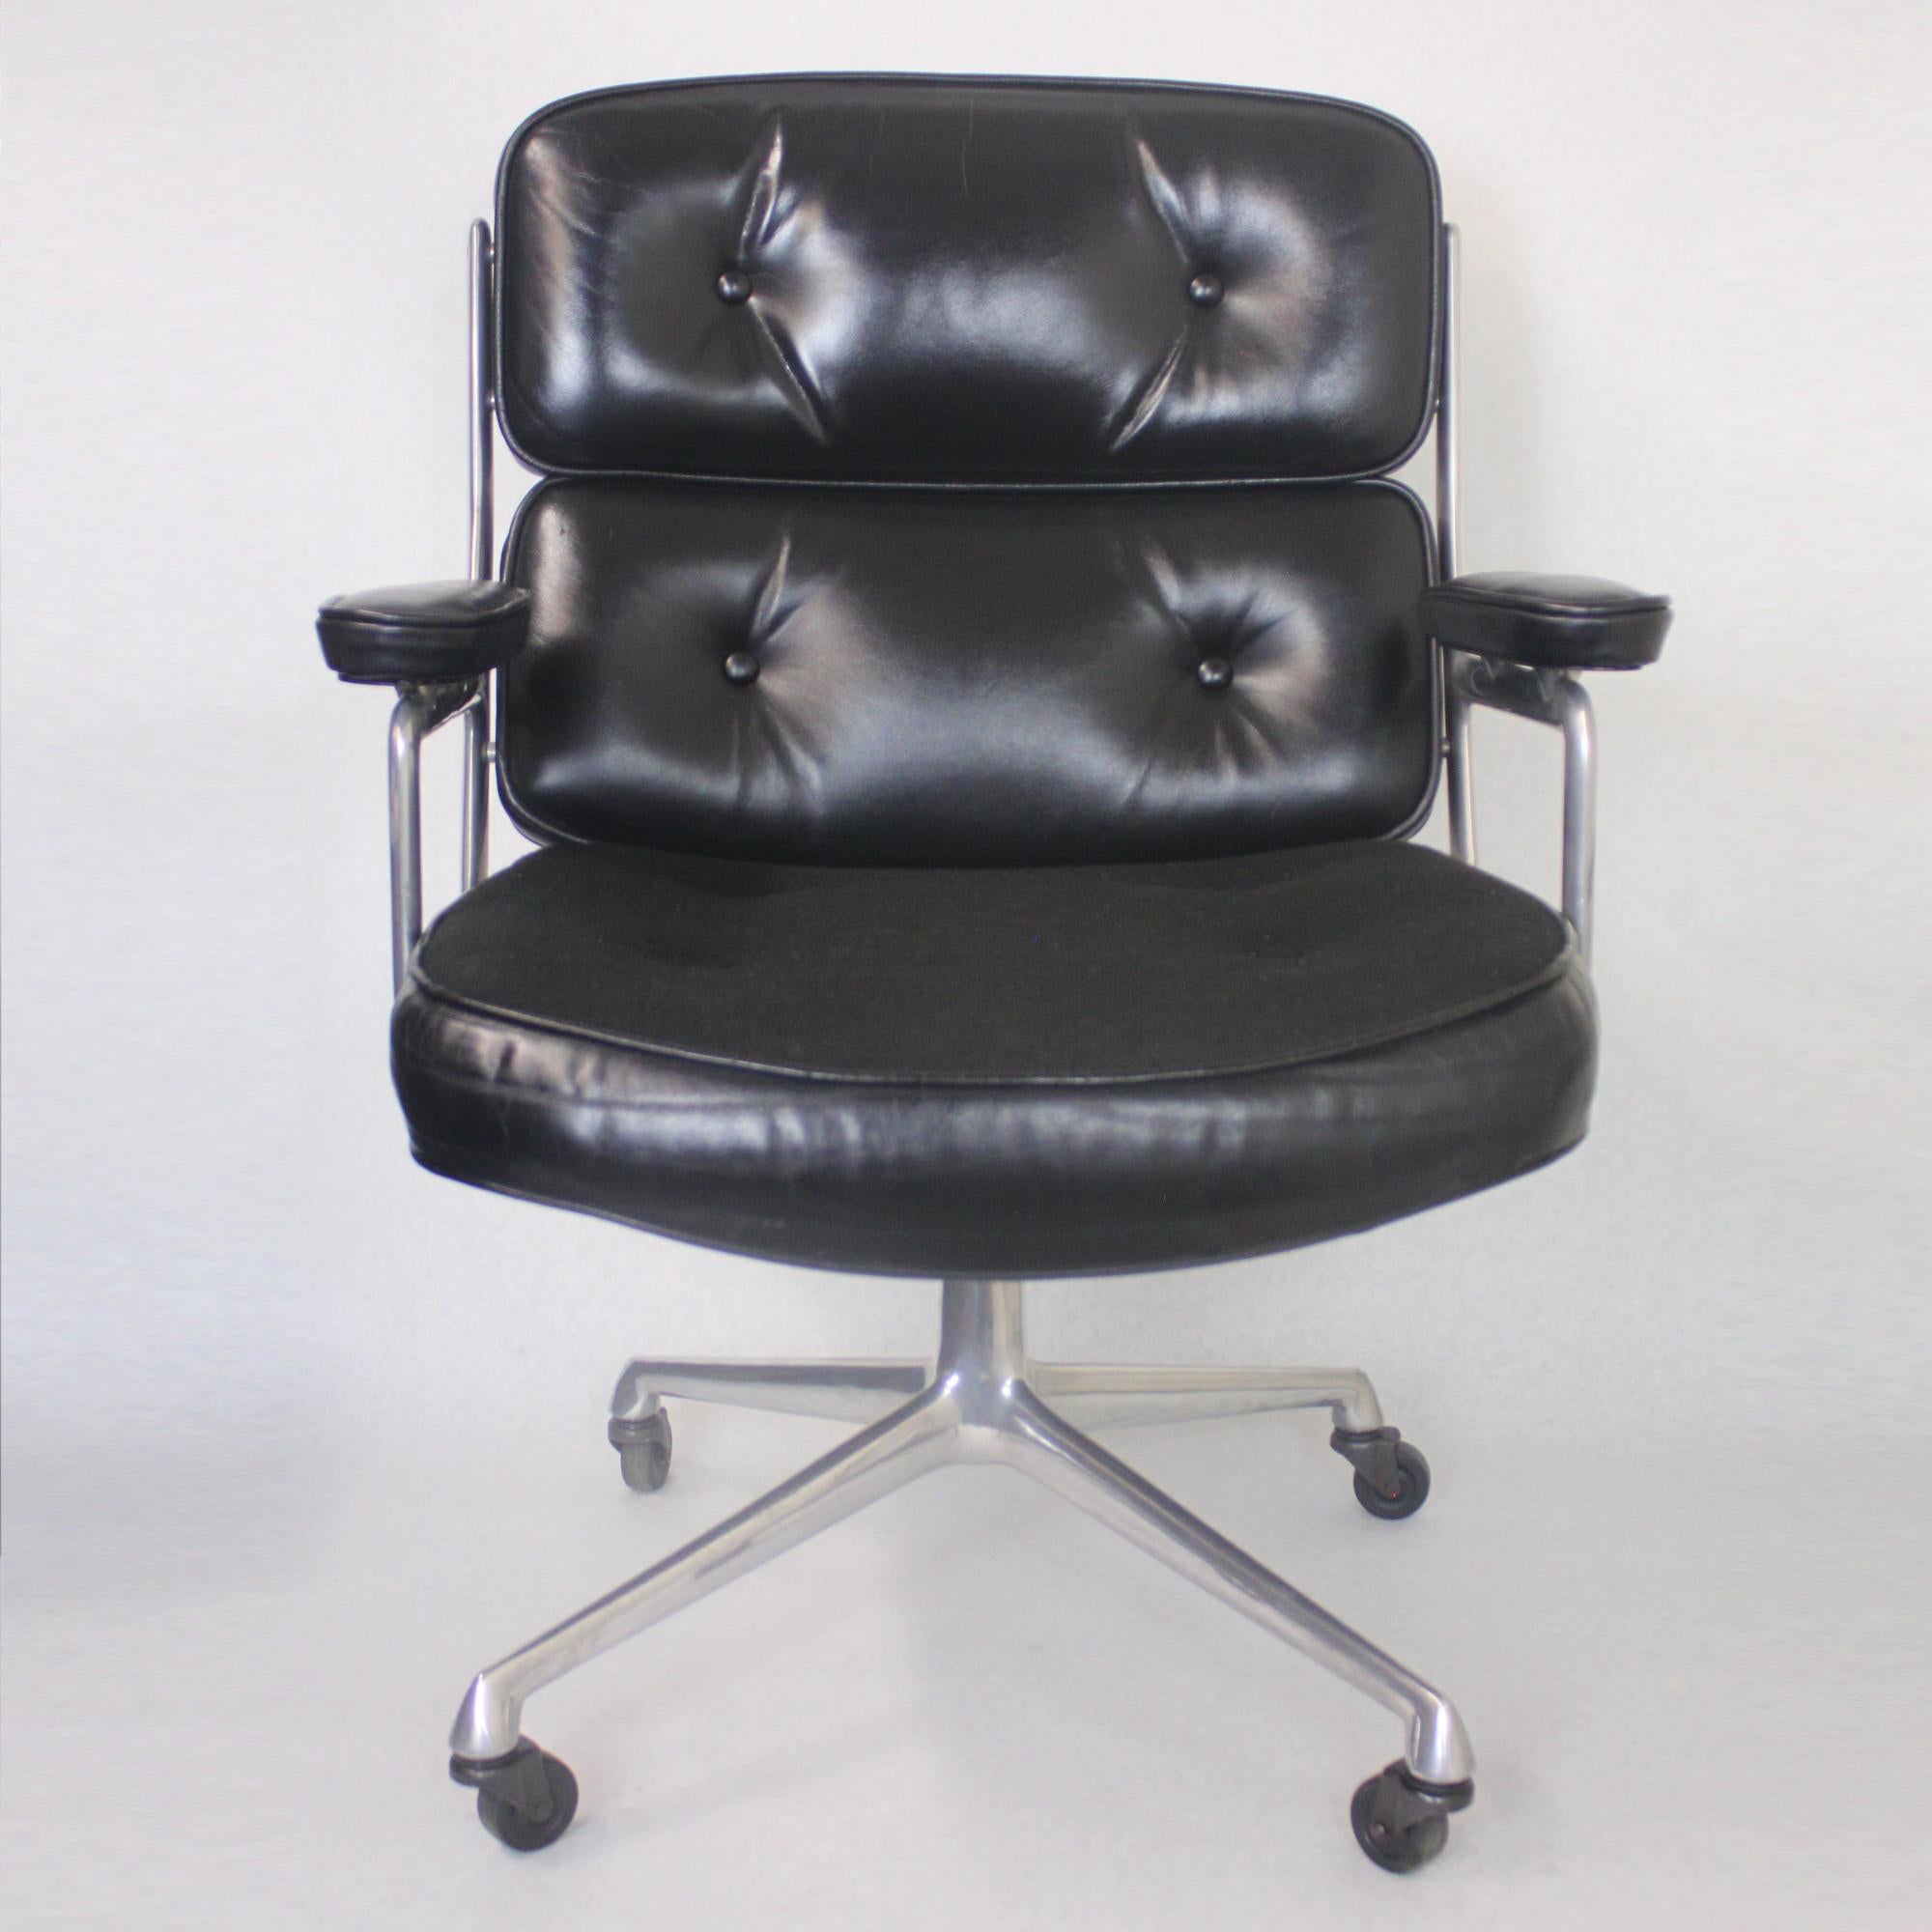 American 1960s Mid-Century Modern Herman Miller Time Life Executive Desk Lounge Chair